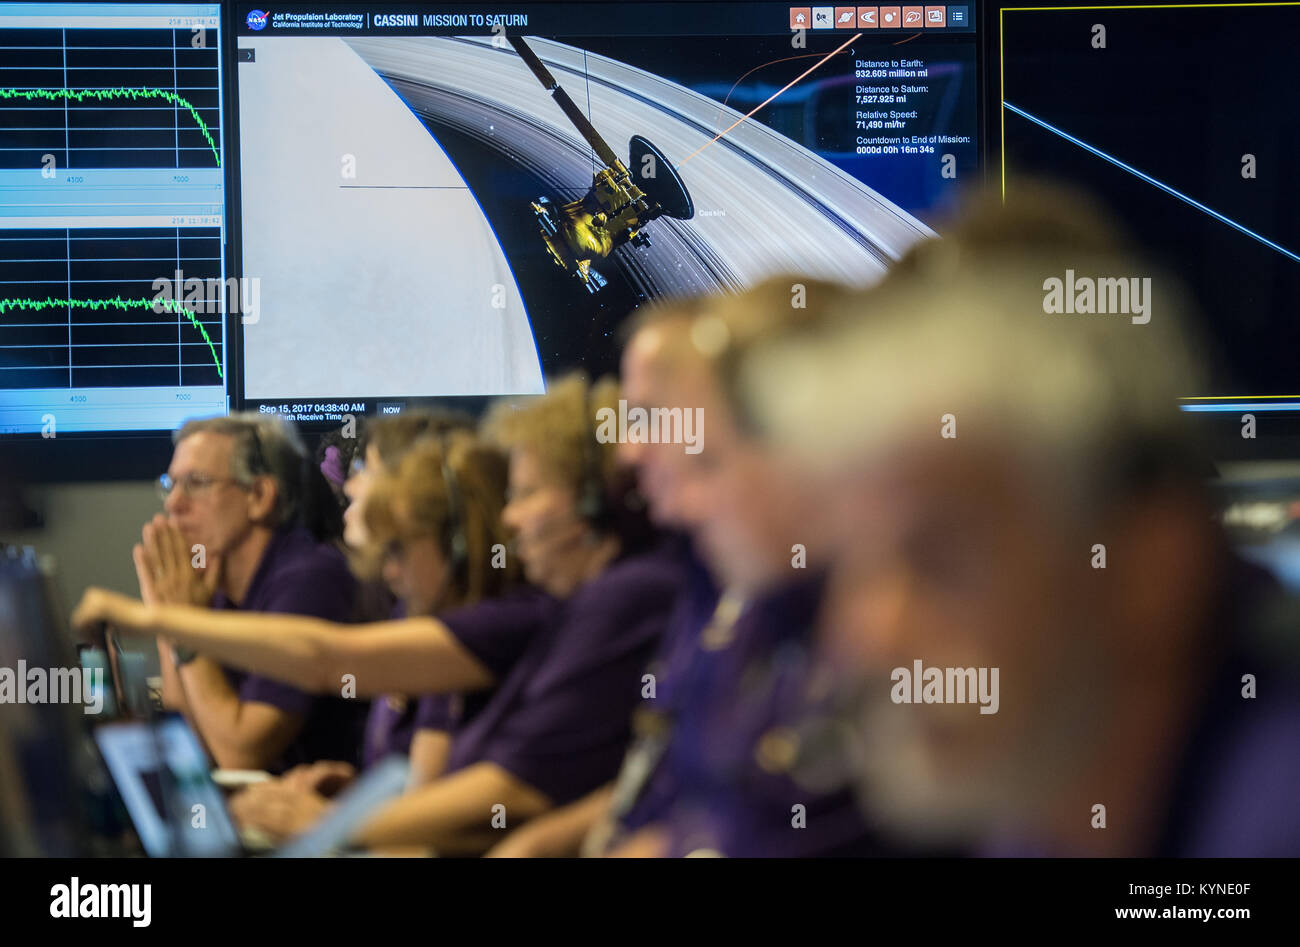 A monitor in the mission control room shows a visualization of Cassini as it makes its final plunge into Saturn, Friday, Sept. 15, 2017 at NASA's Jet Propulsion Laboratory in Pasadena, California. Since its arrival in 2004, the Cassini-Huygens mission has been a discovery machine, revolutionizing our knowledge of the Saturn system and captivating us with data and images never before obtained with such detail and clarity. On Sept. 15, 2017, operators deliberately plunged the spacecraft into Saturn, as Cassini gathered science until the end. Loss of contact with the Cassini spacecraft occurred a Stock Photo